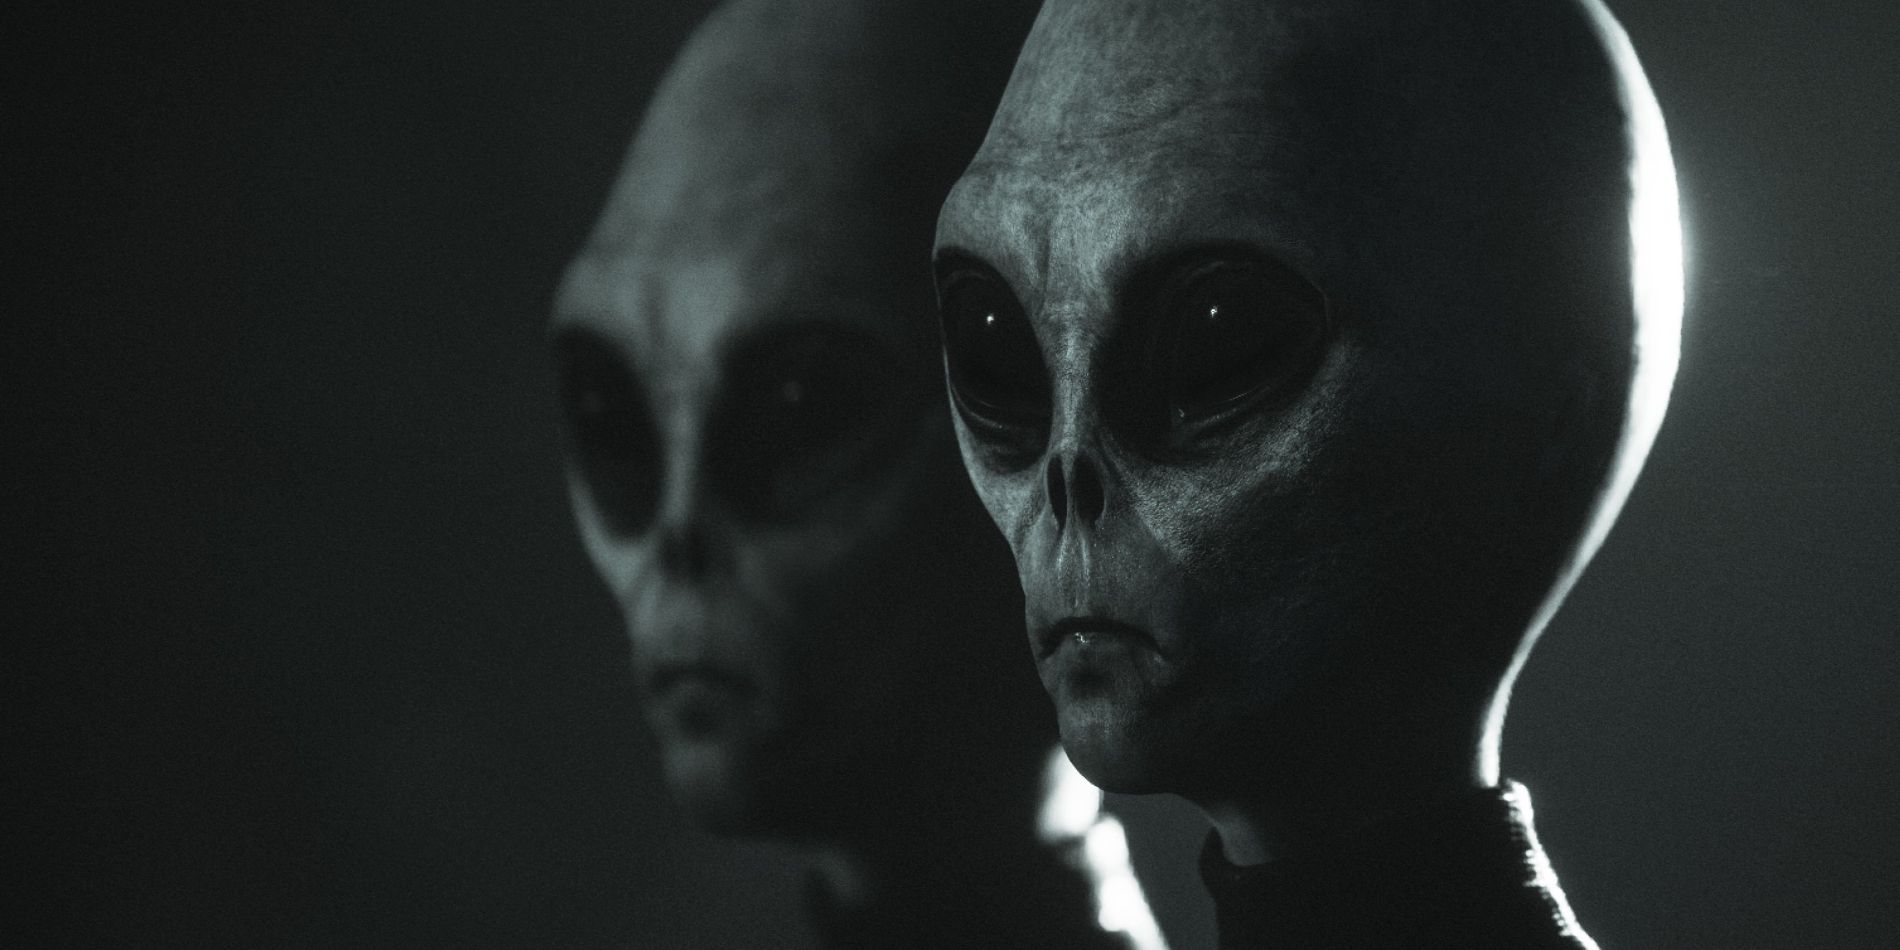 Two of The Grey aliens from the game Greyhill Incident standing next to each other, with large heads, big black eyes, and small mouths.